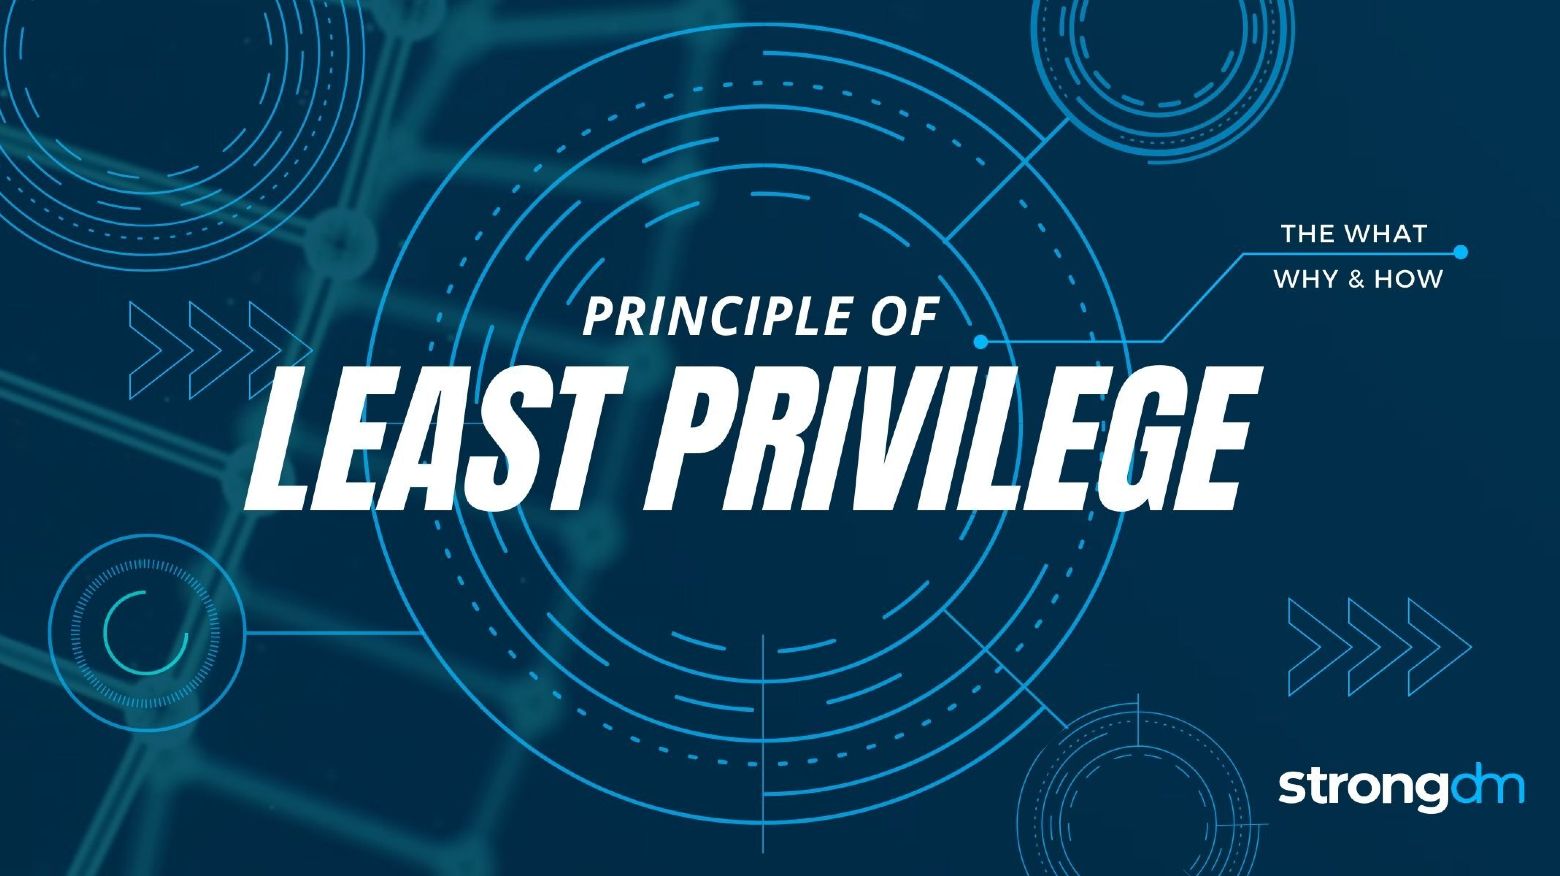 Principle of Least Privilege (PoLP): What Is It, Why Is It Important, & How to Use It